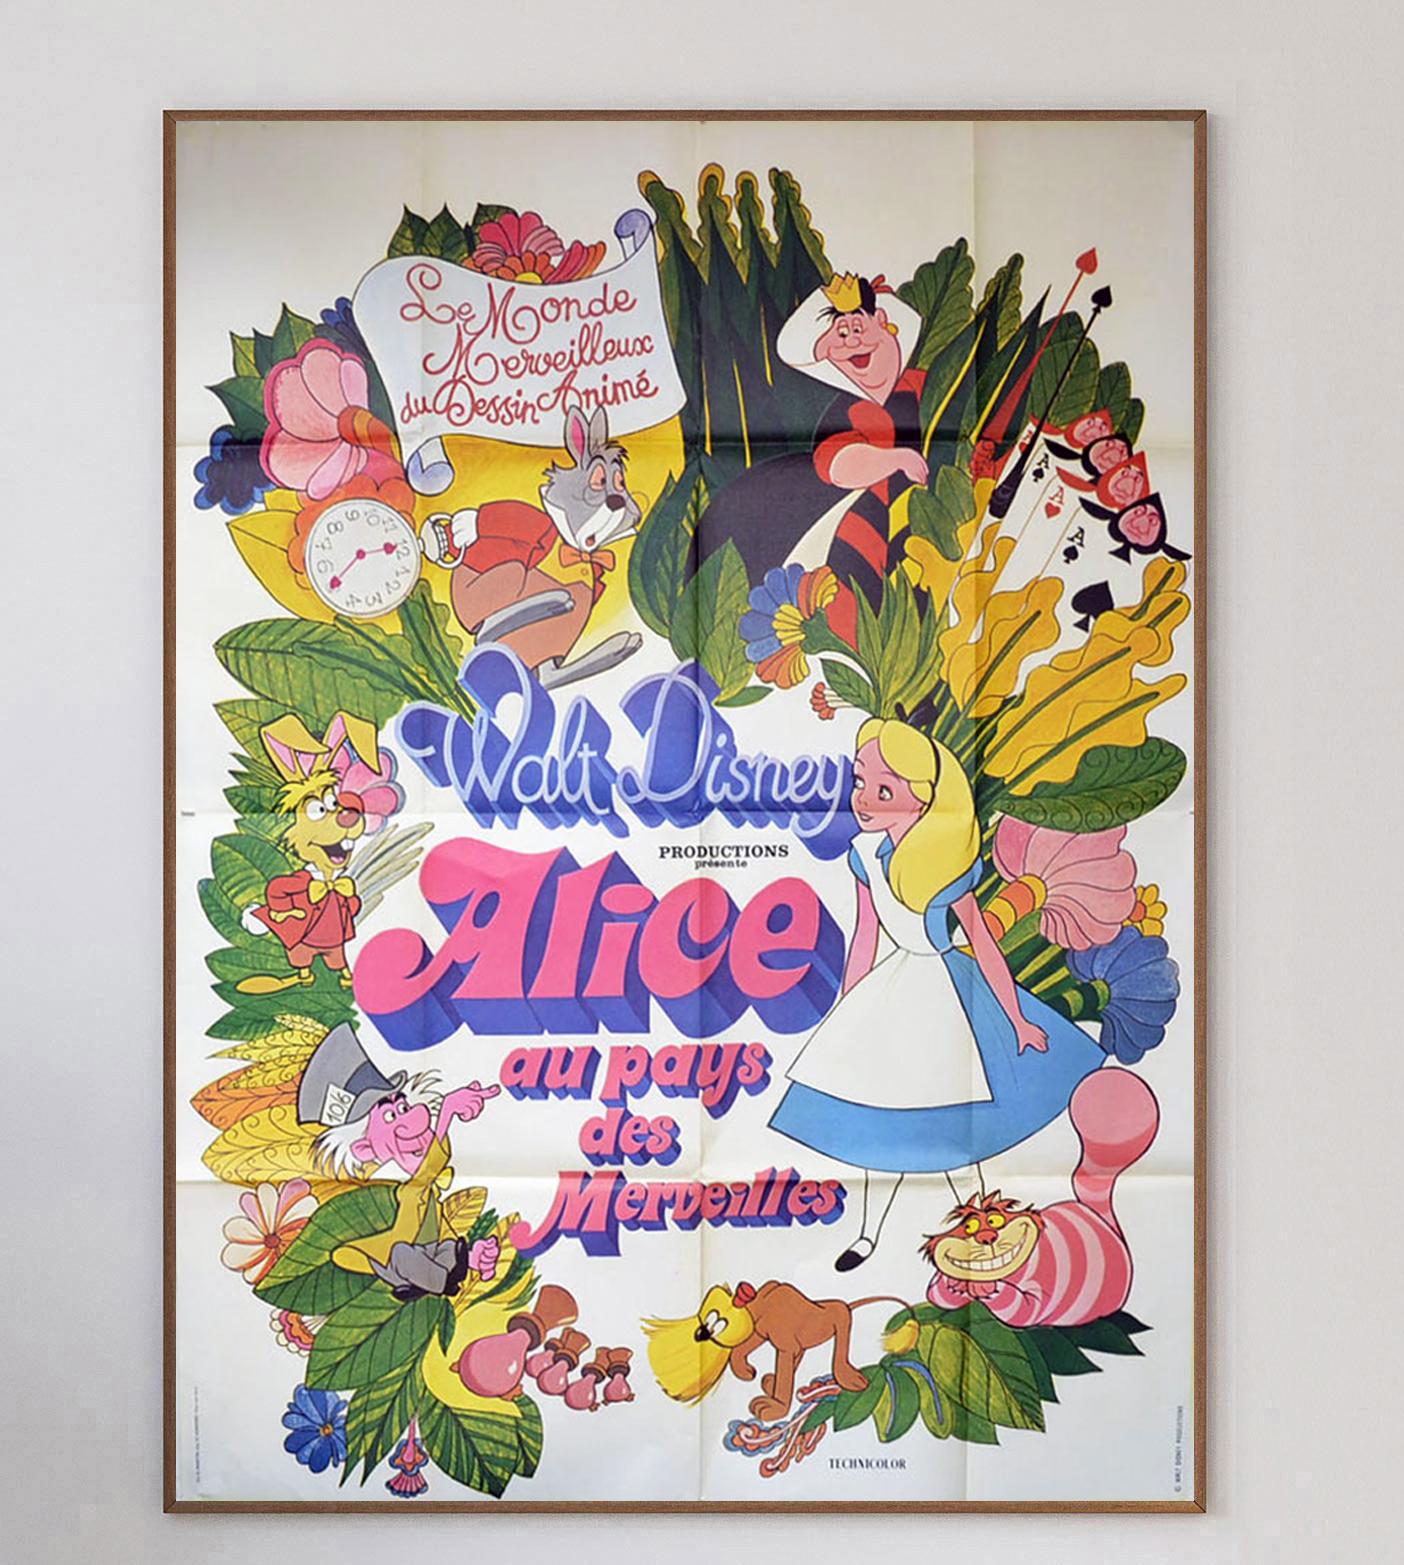 Beautifully illustrated poster of Disney's Alice in Wonderland.

Alice in Wonderland is a 1951 American animated musical fantasy-adventure film produced by Walt Disney Productions and based on the Alice books by Lewis Carroll. The 13th release of